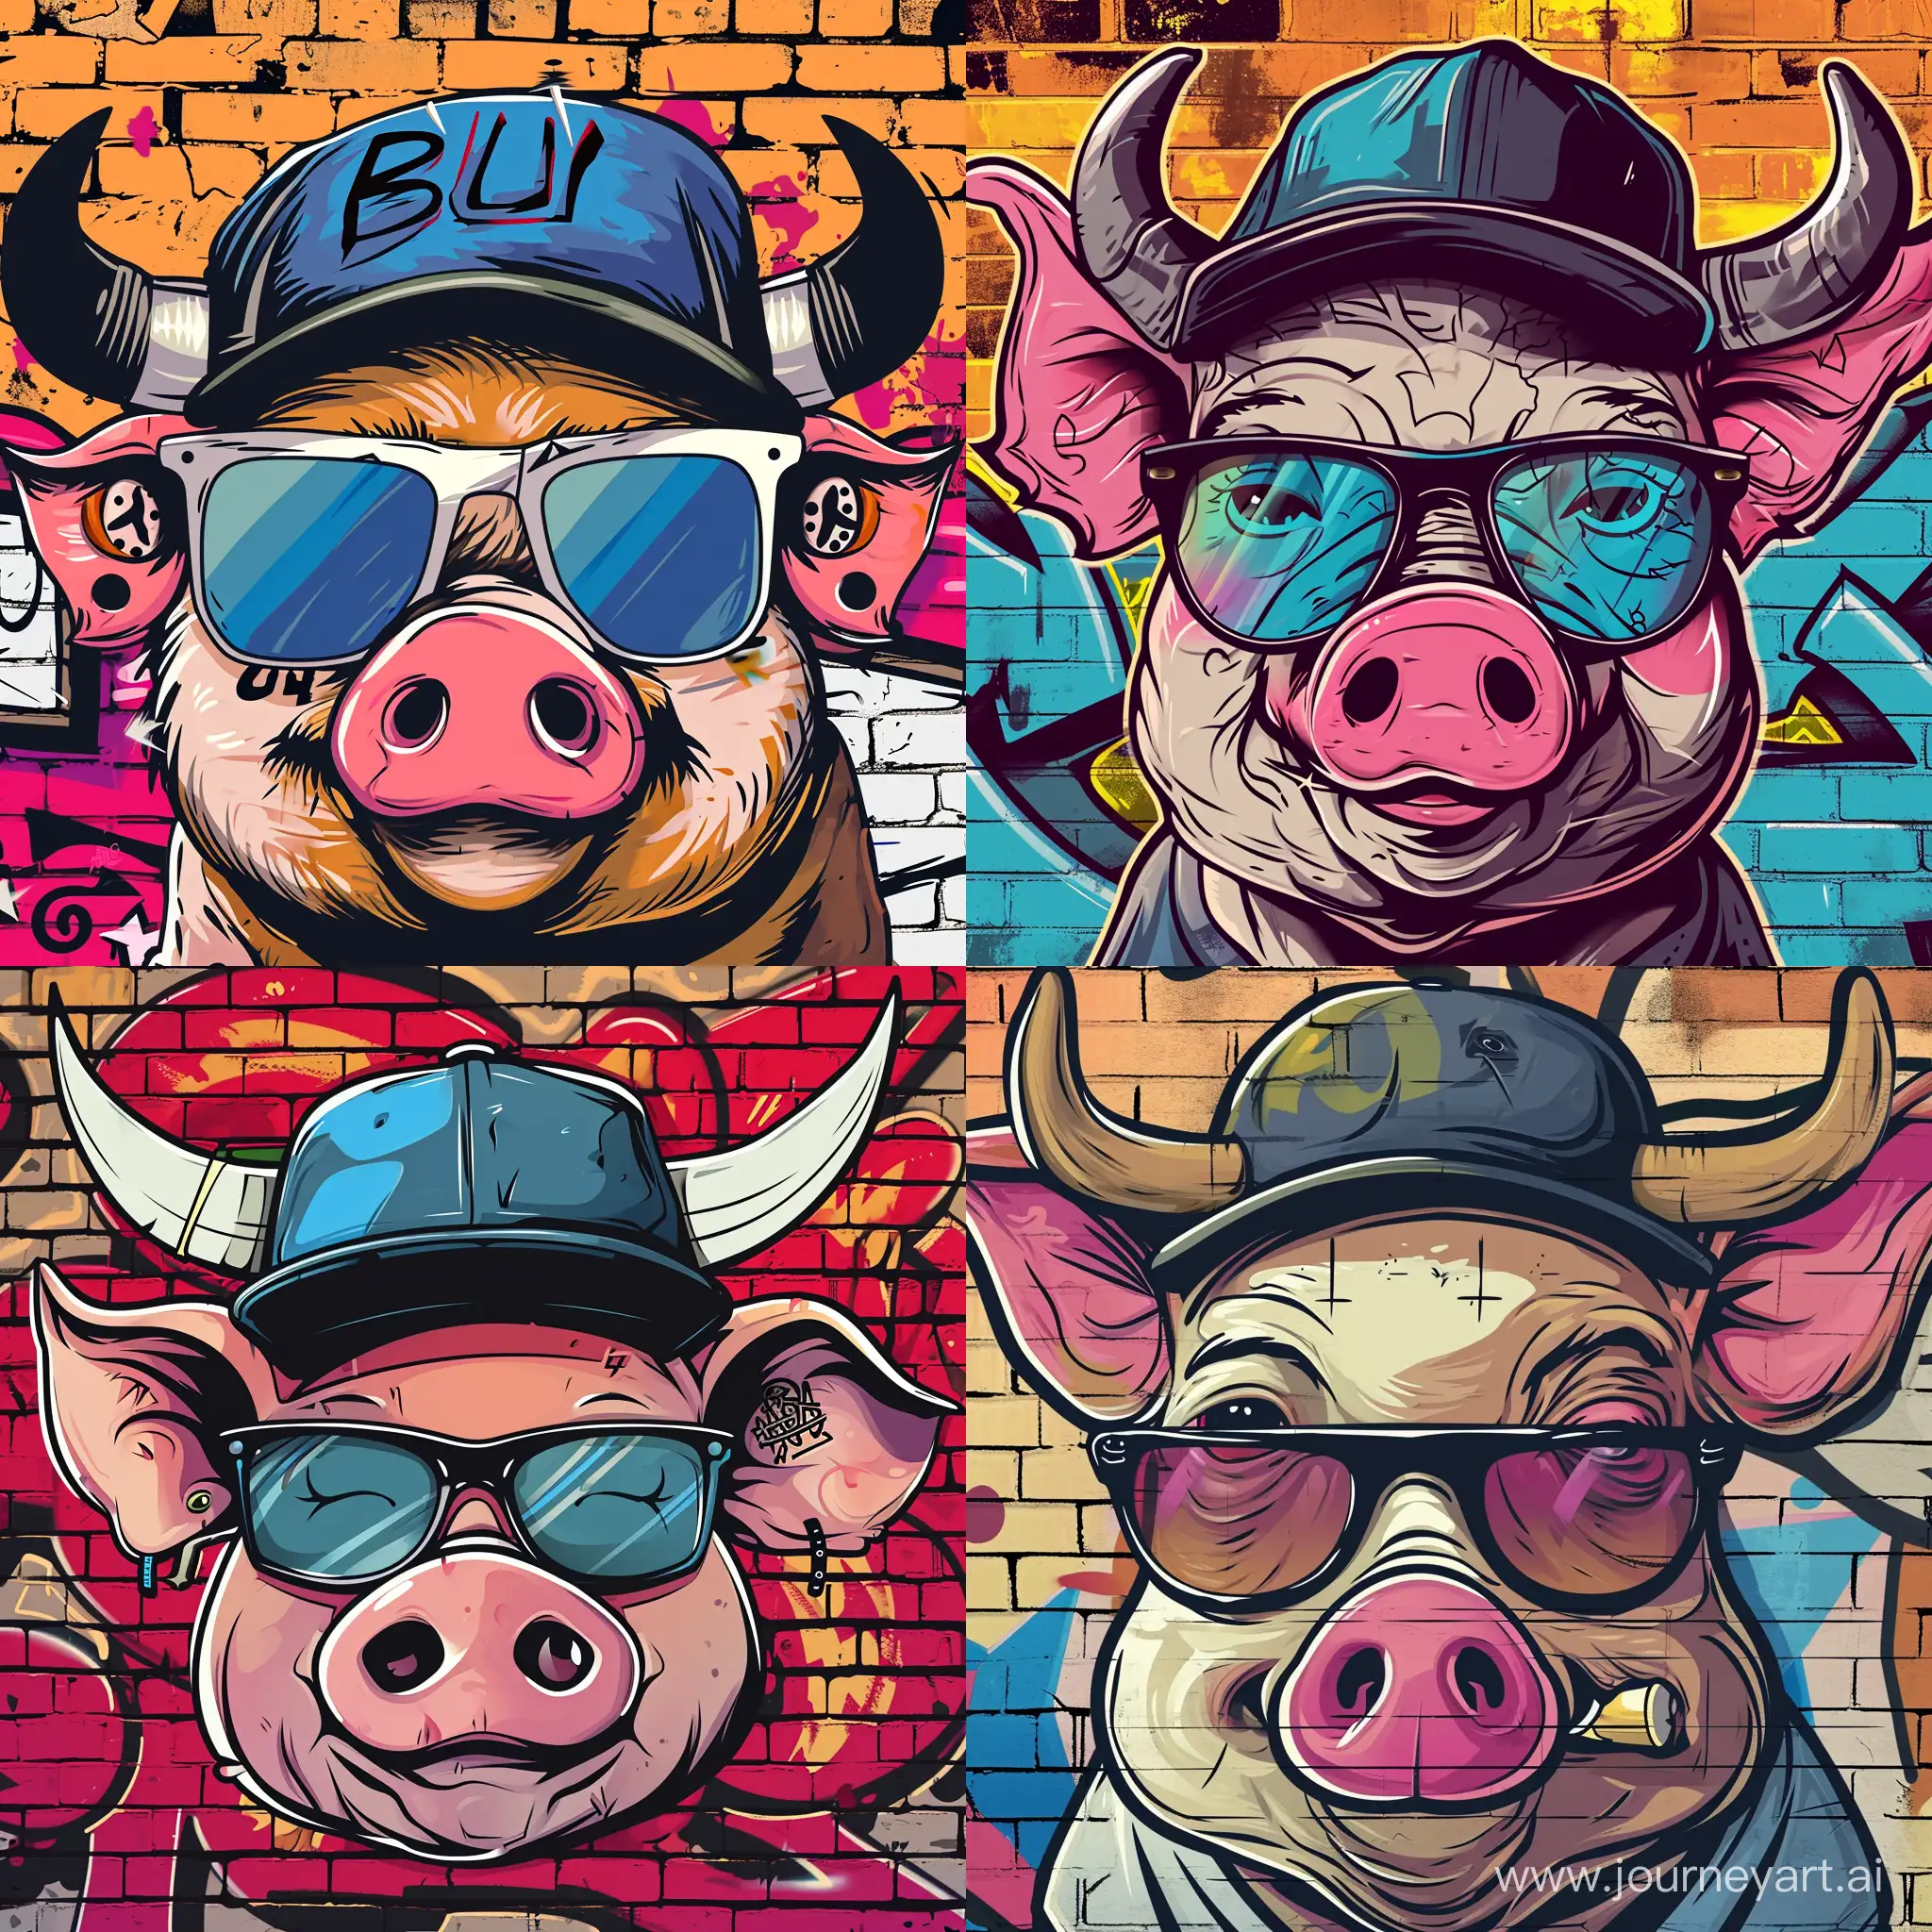 Cool-Pig-Cartoon-with-Sunglasses-and-Bull-Cap-on-Graffiti-Background